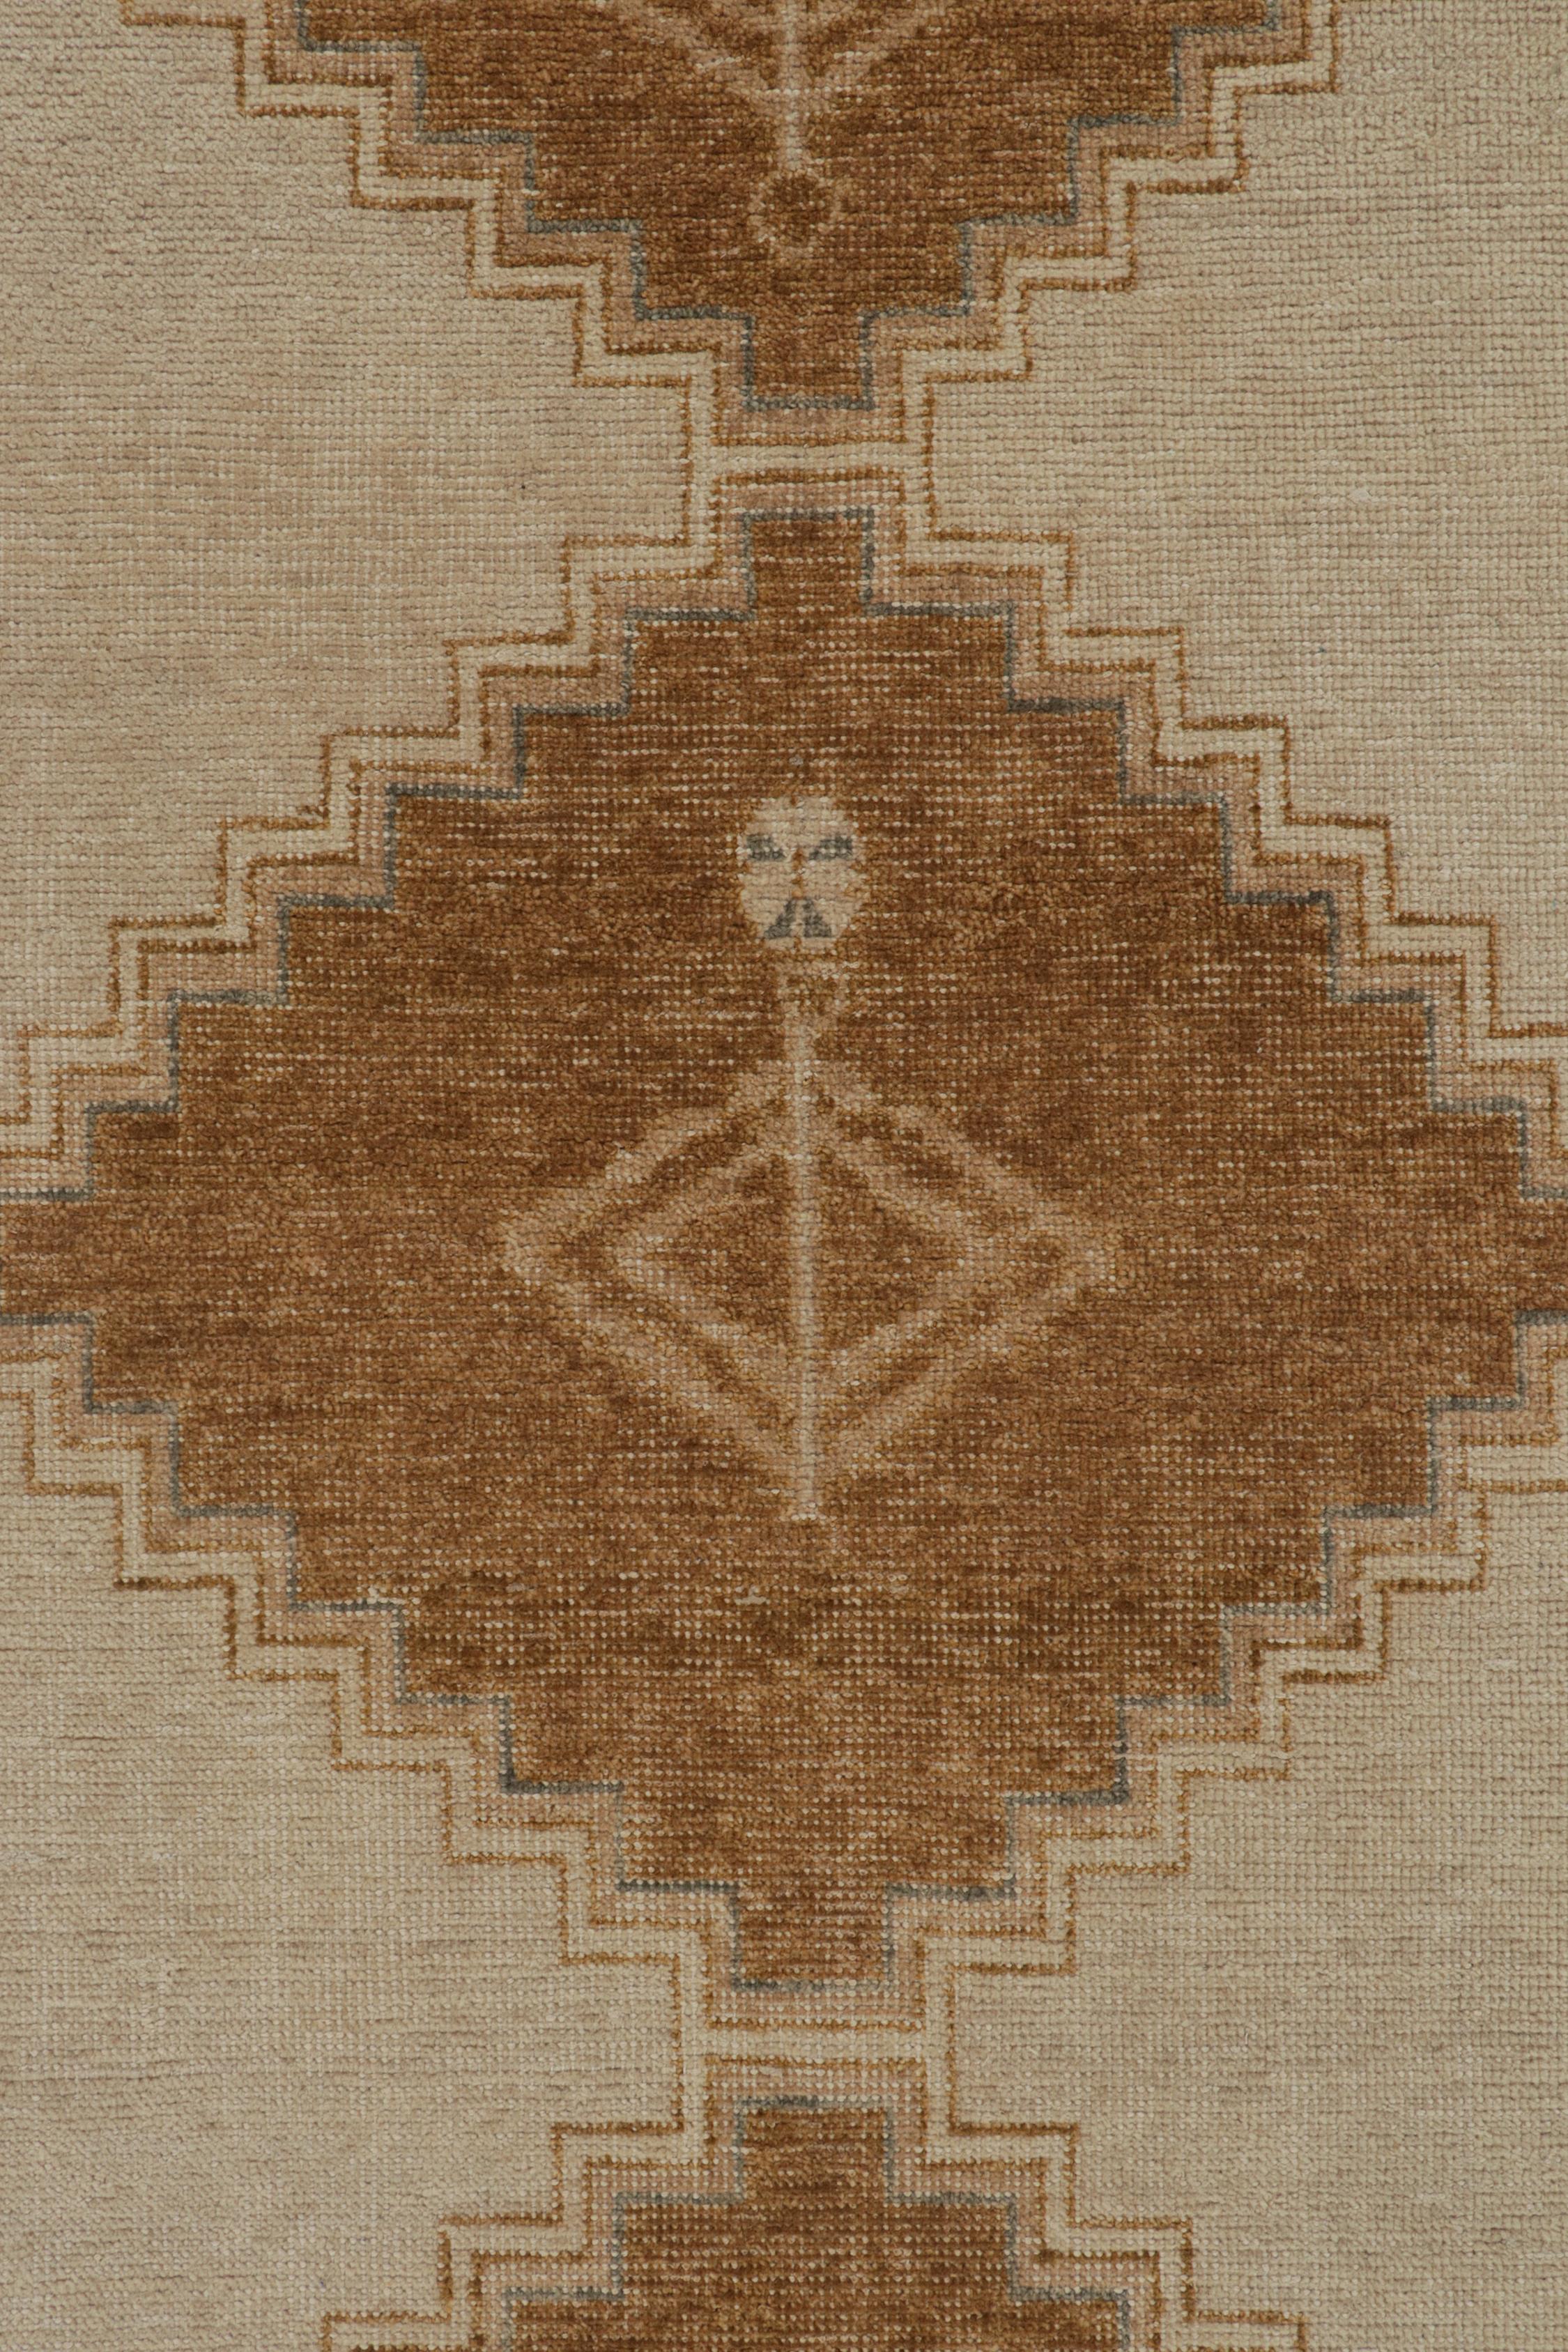 Contemporary Rug & Kilim’s Distressed Tribal Style Rug in Beige, Brown and Gold Patterns For Sale